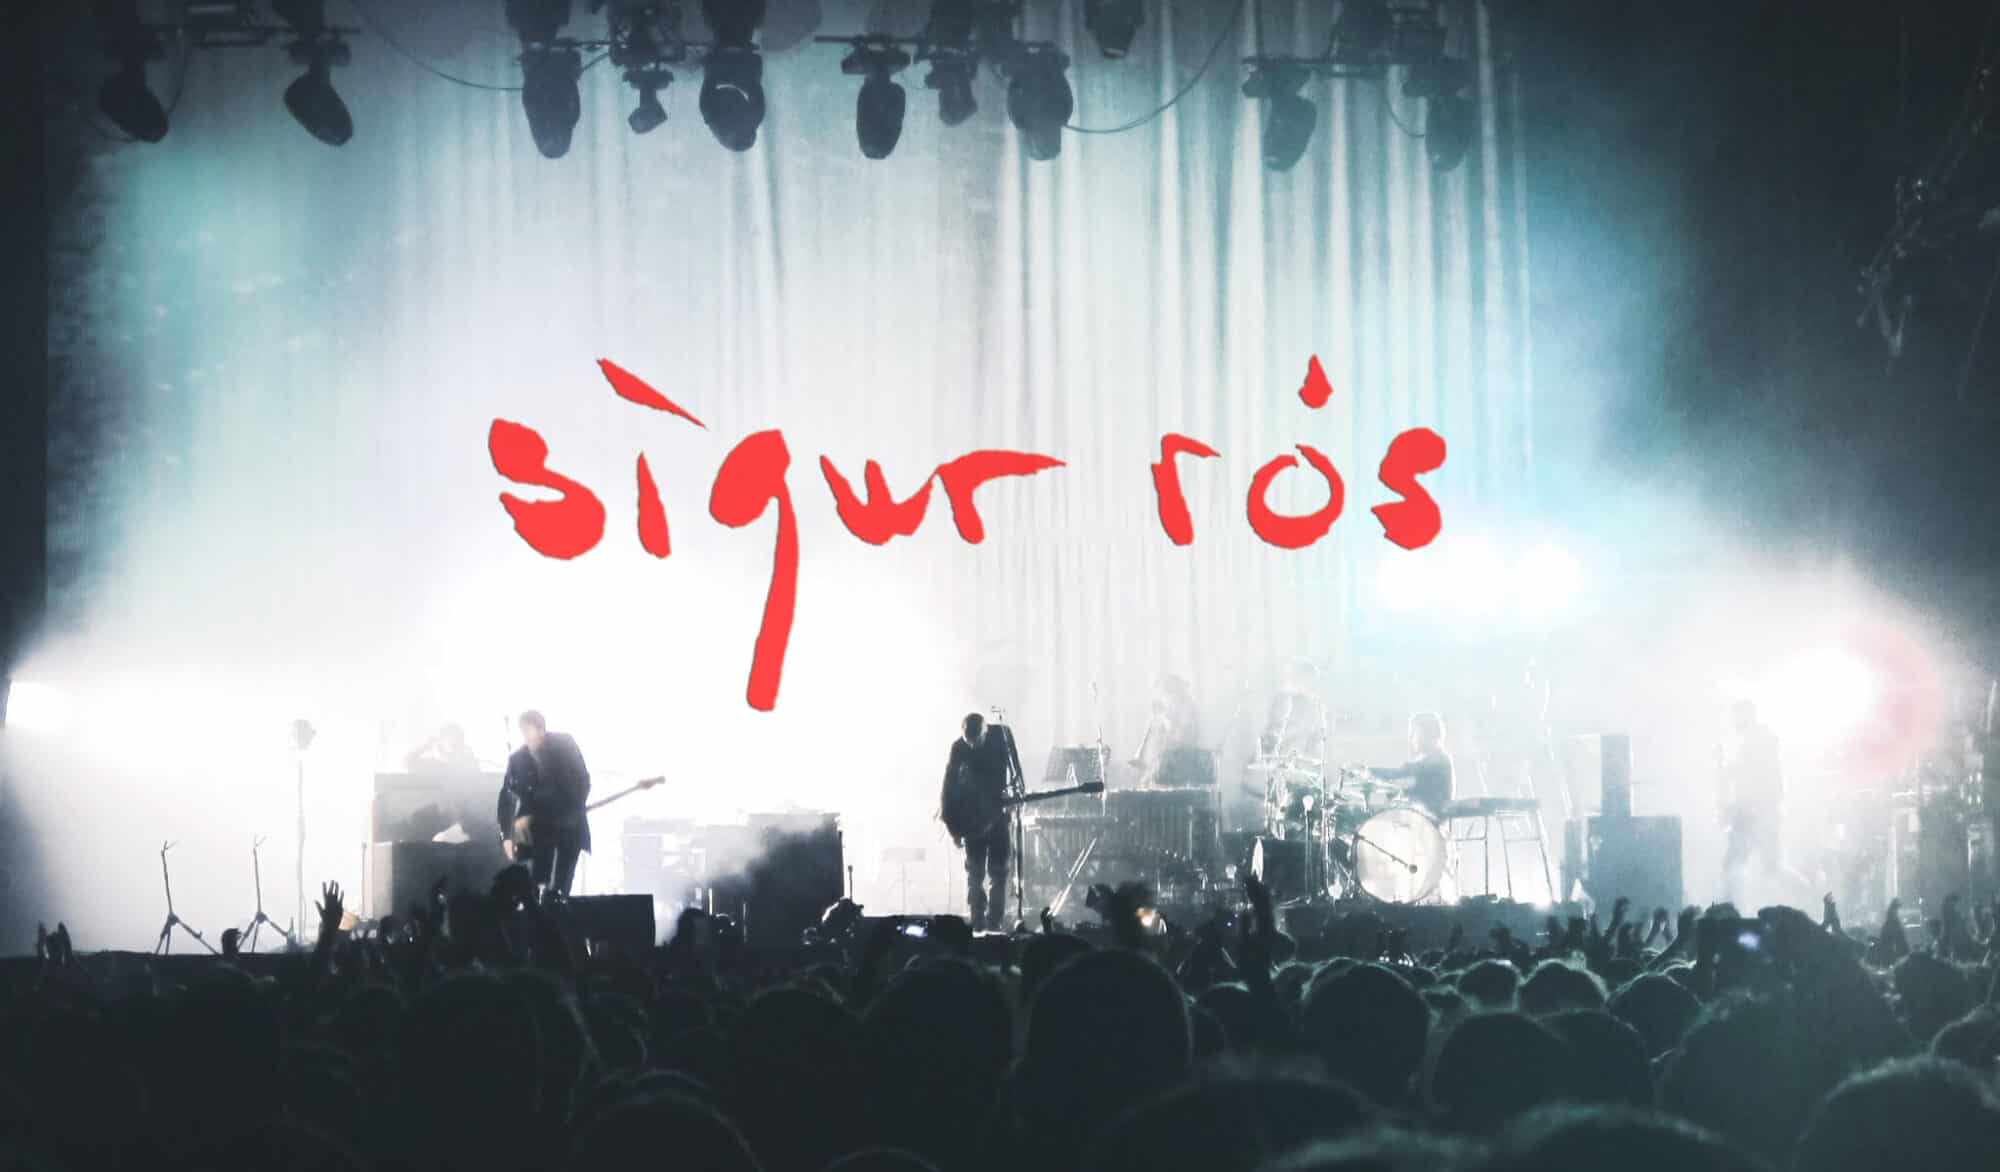 The band Sigur Ros performing at Rock en Seine with red text overlay of the band's name.